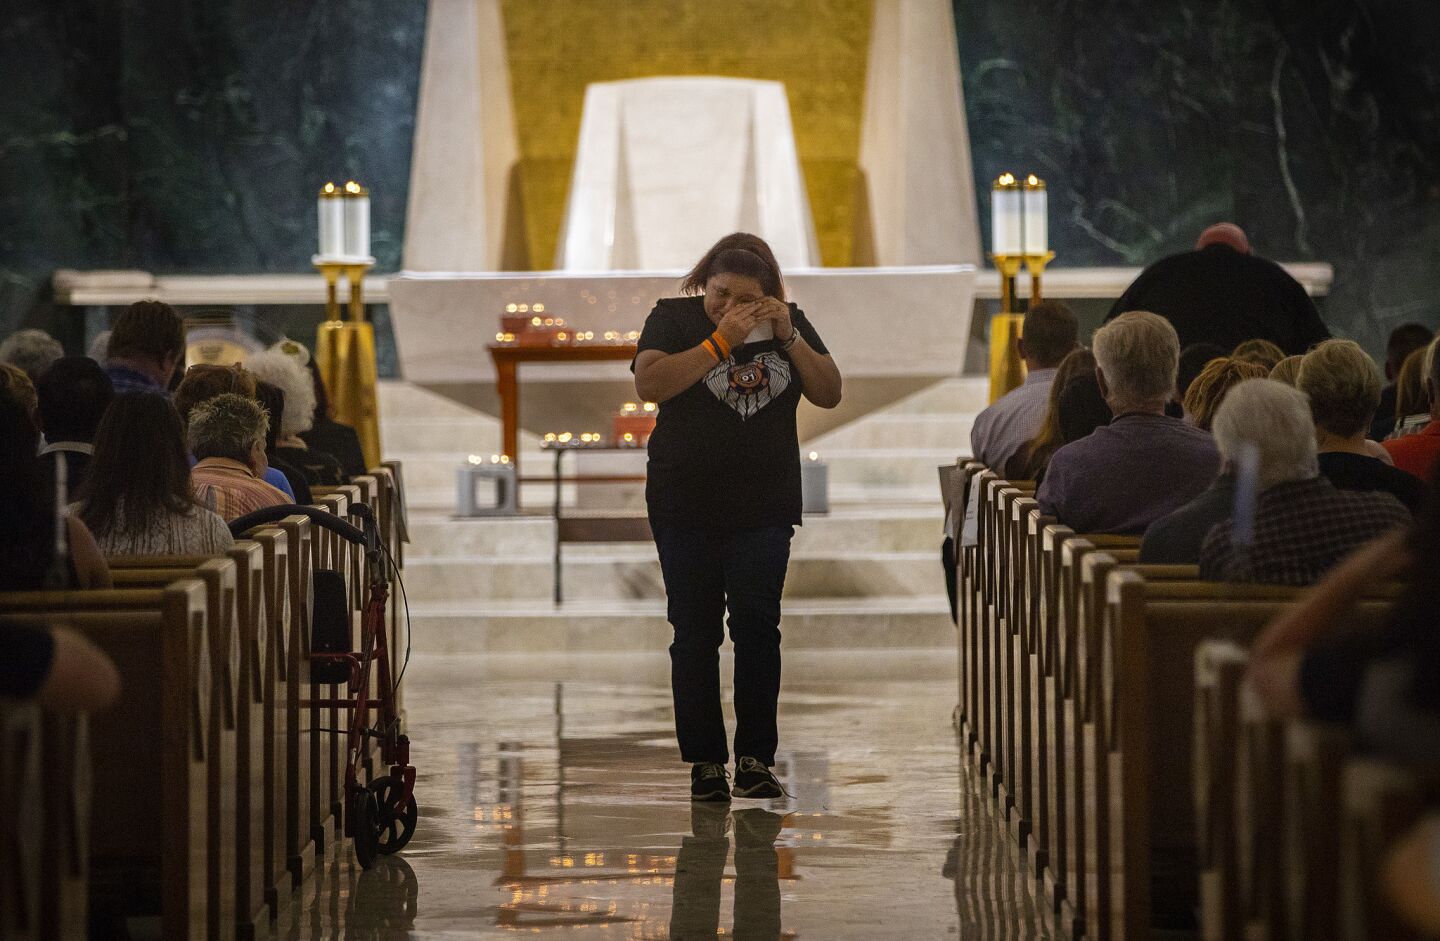 Mindy Scott, a survivor of the 2017 massacre in her hometown of Las Vegas wipes tears after she spoke during an interfaith event at Guardian Angel Cathedral to mark the first anniversary of the mass shooting.